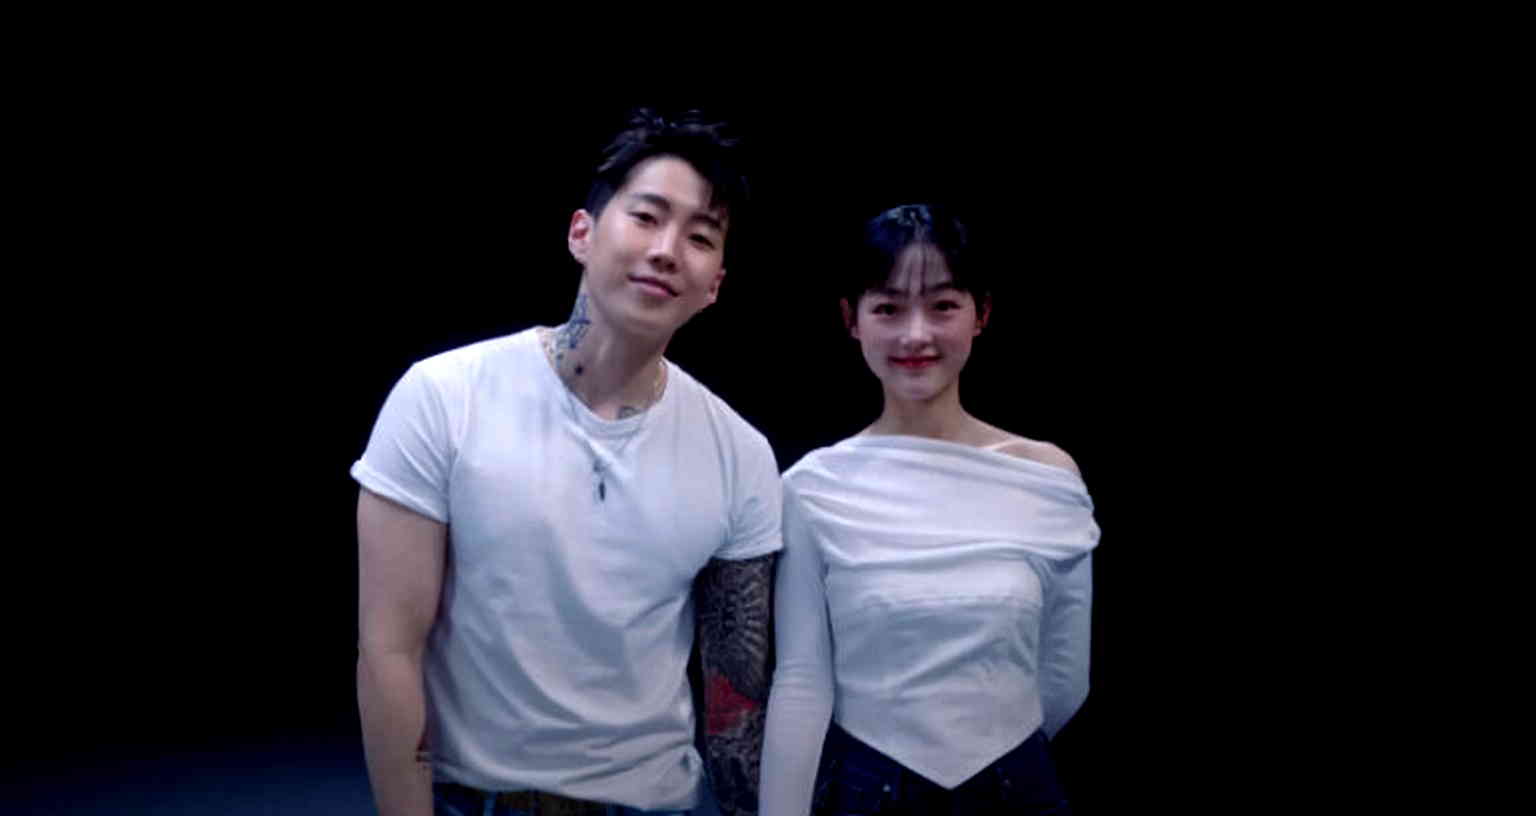 Jay Park drops ‘Yesterday’ music video featuring ‘Squid Game’ star Lee Yoo-mi